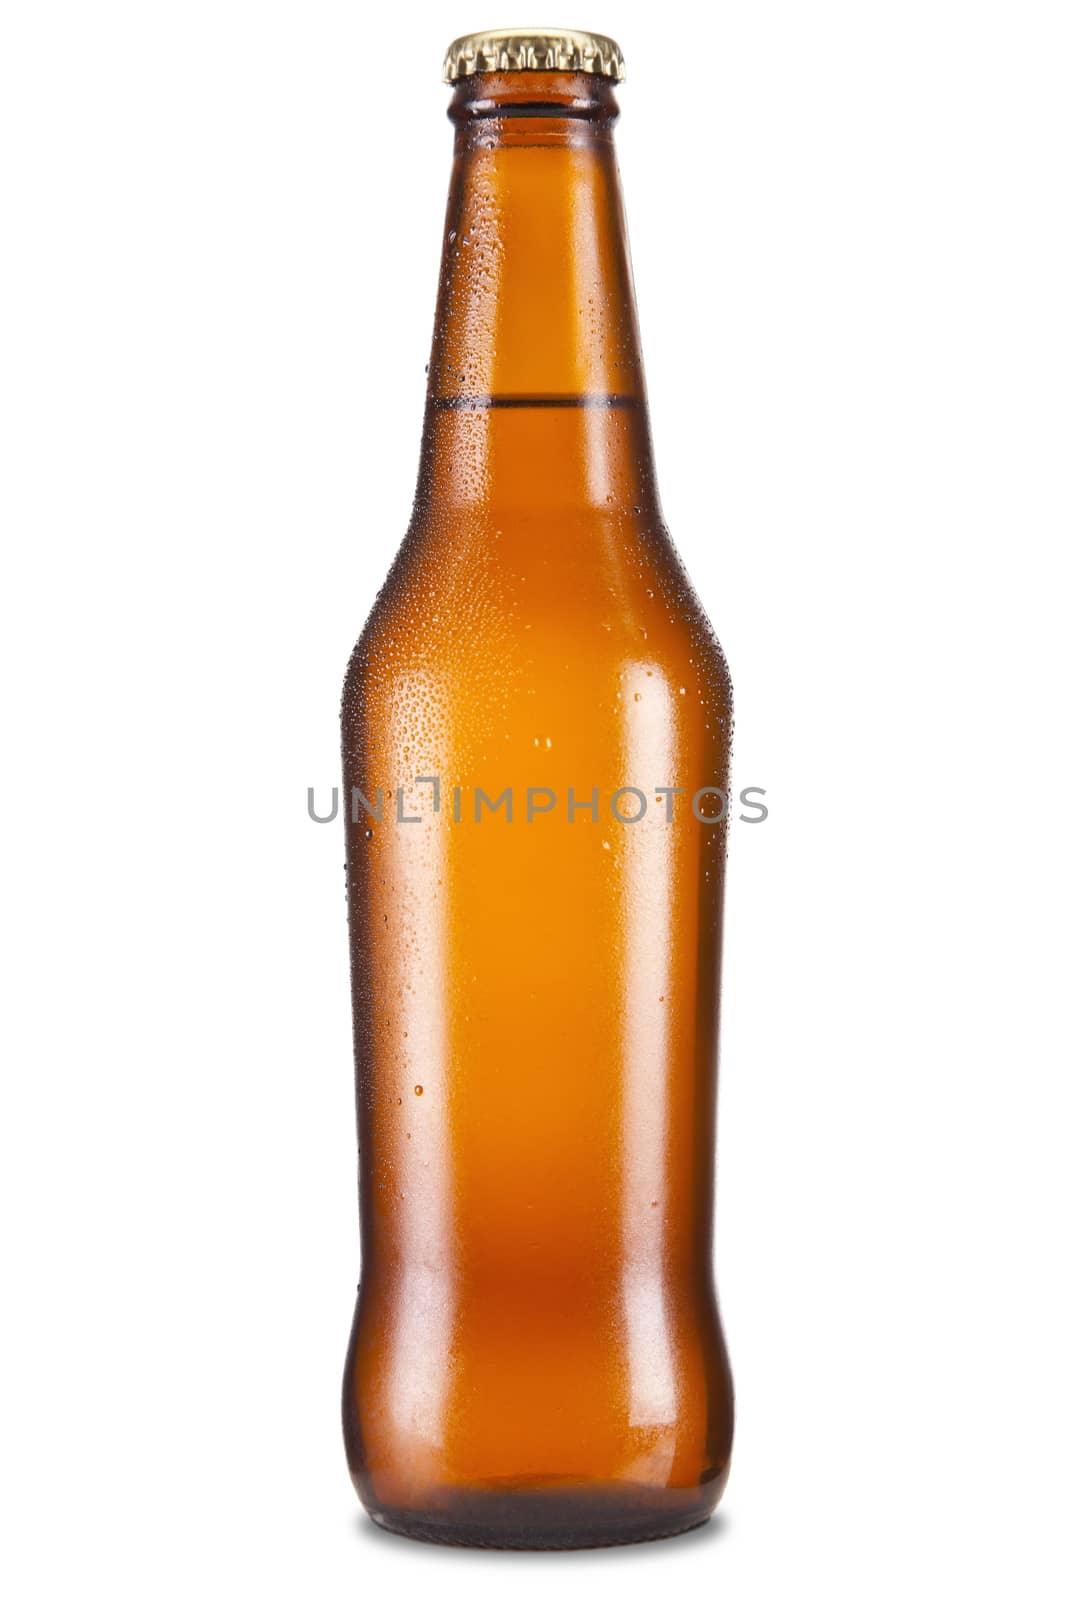 A bottle of beer isolated over a white background.